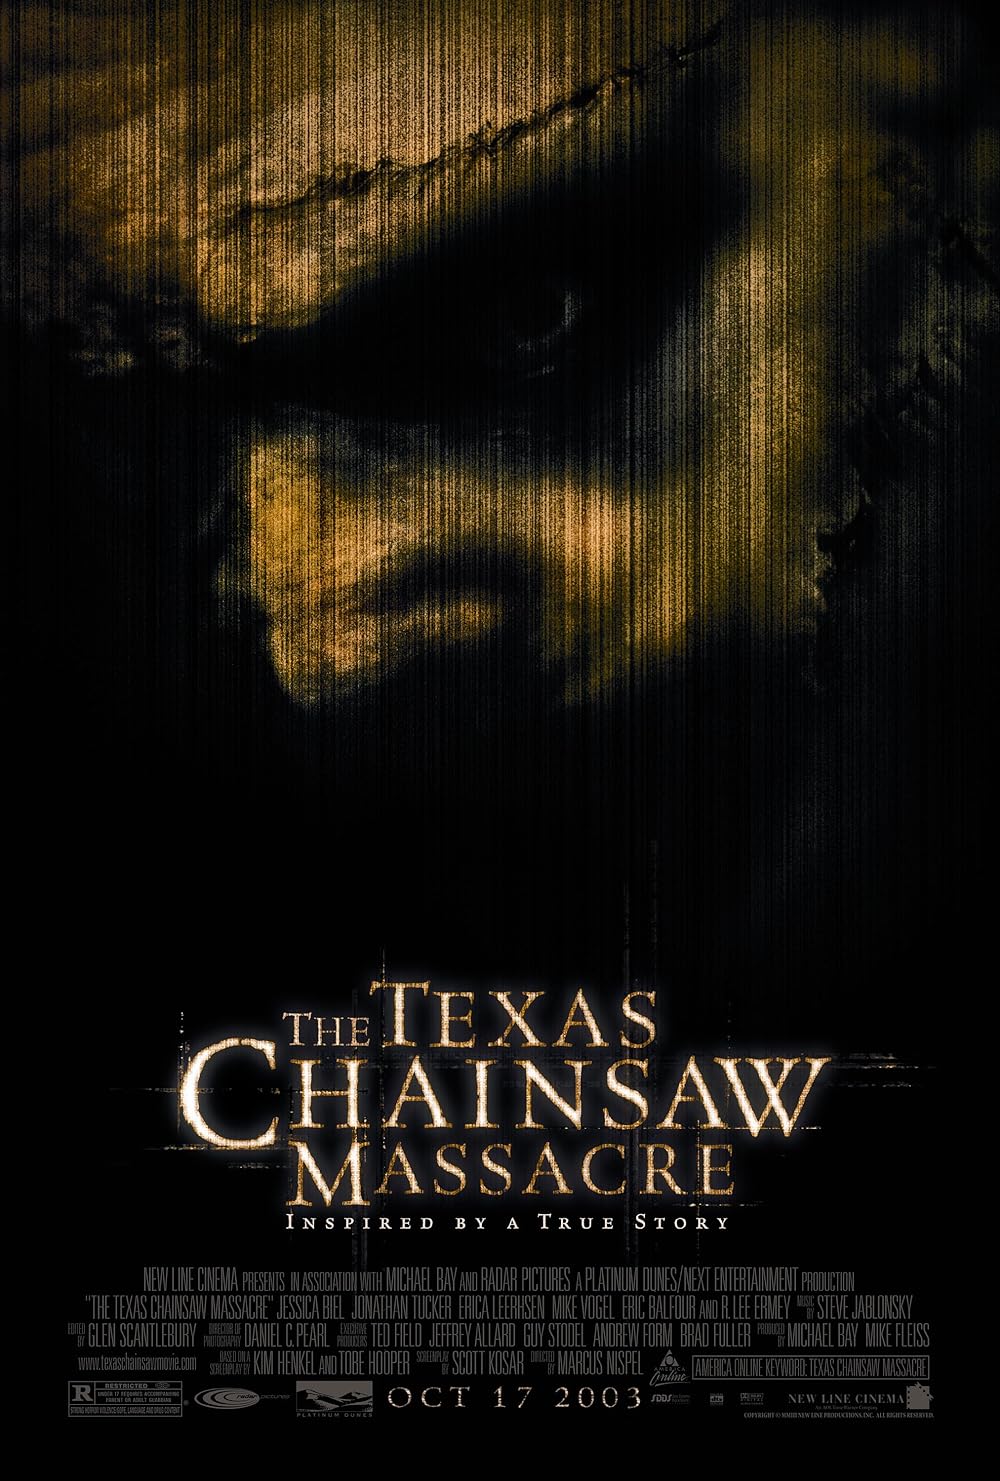 brent bynum recommends the texas chainsaw massacre free pic